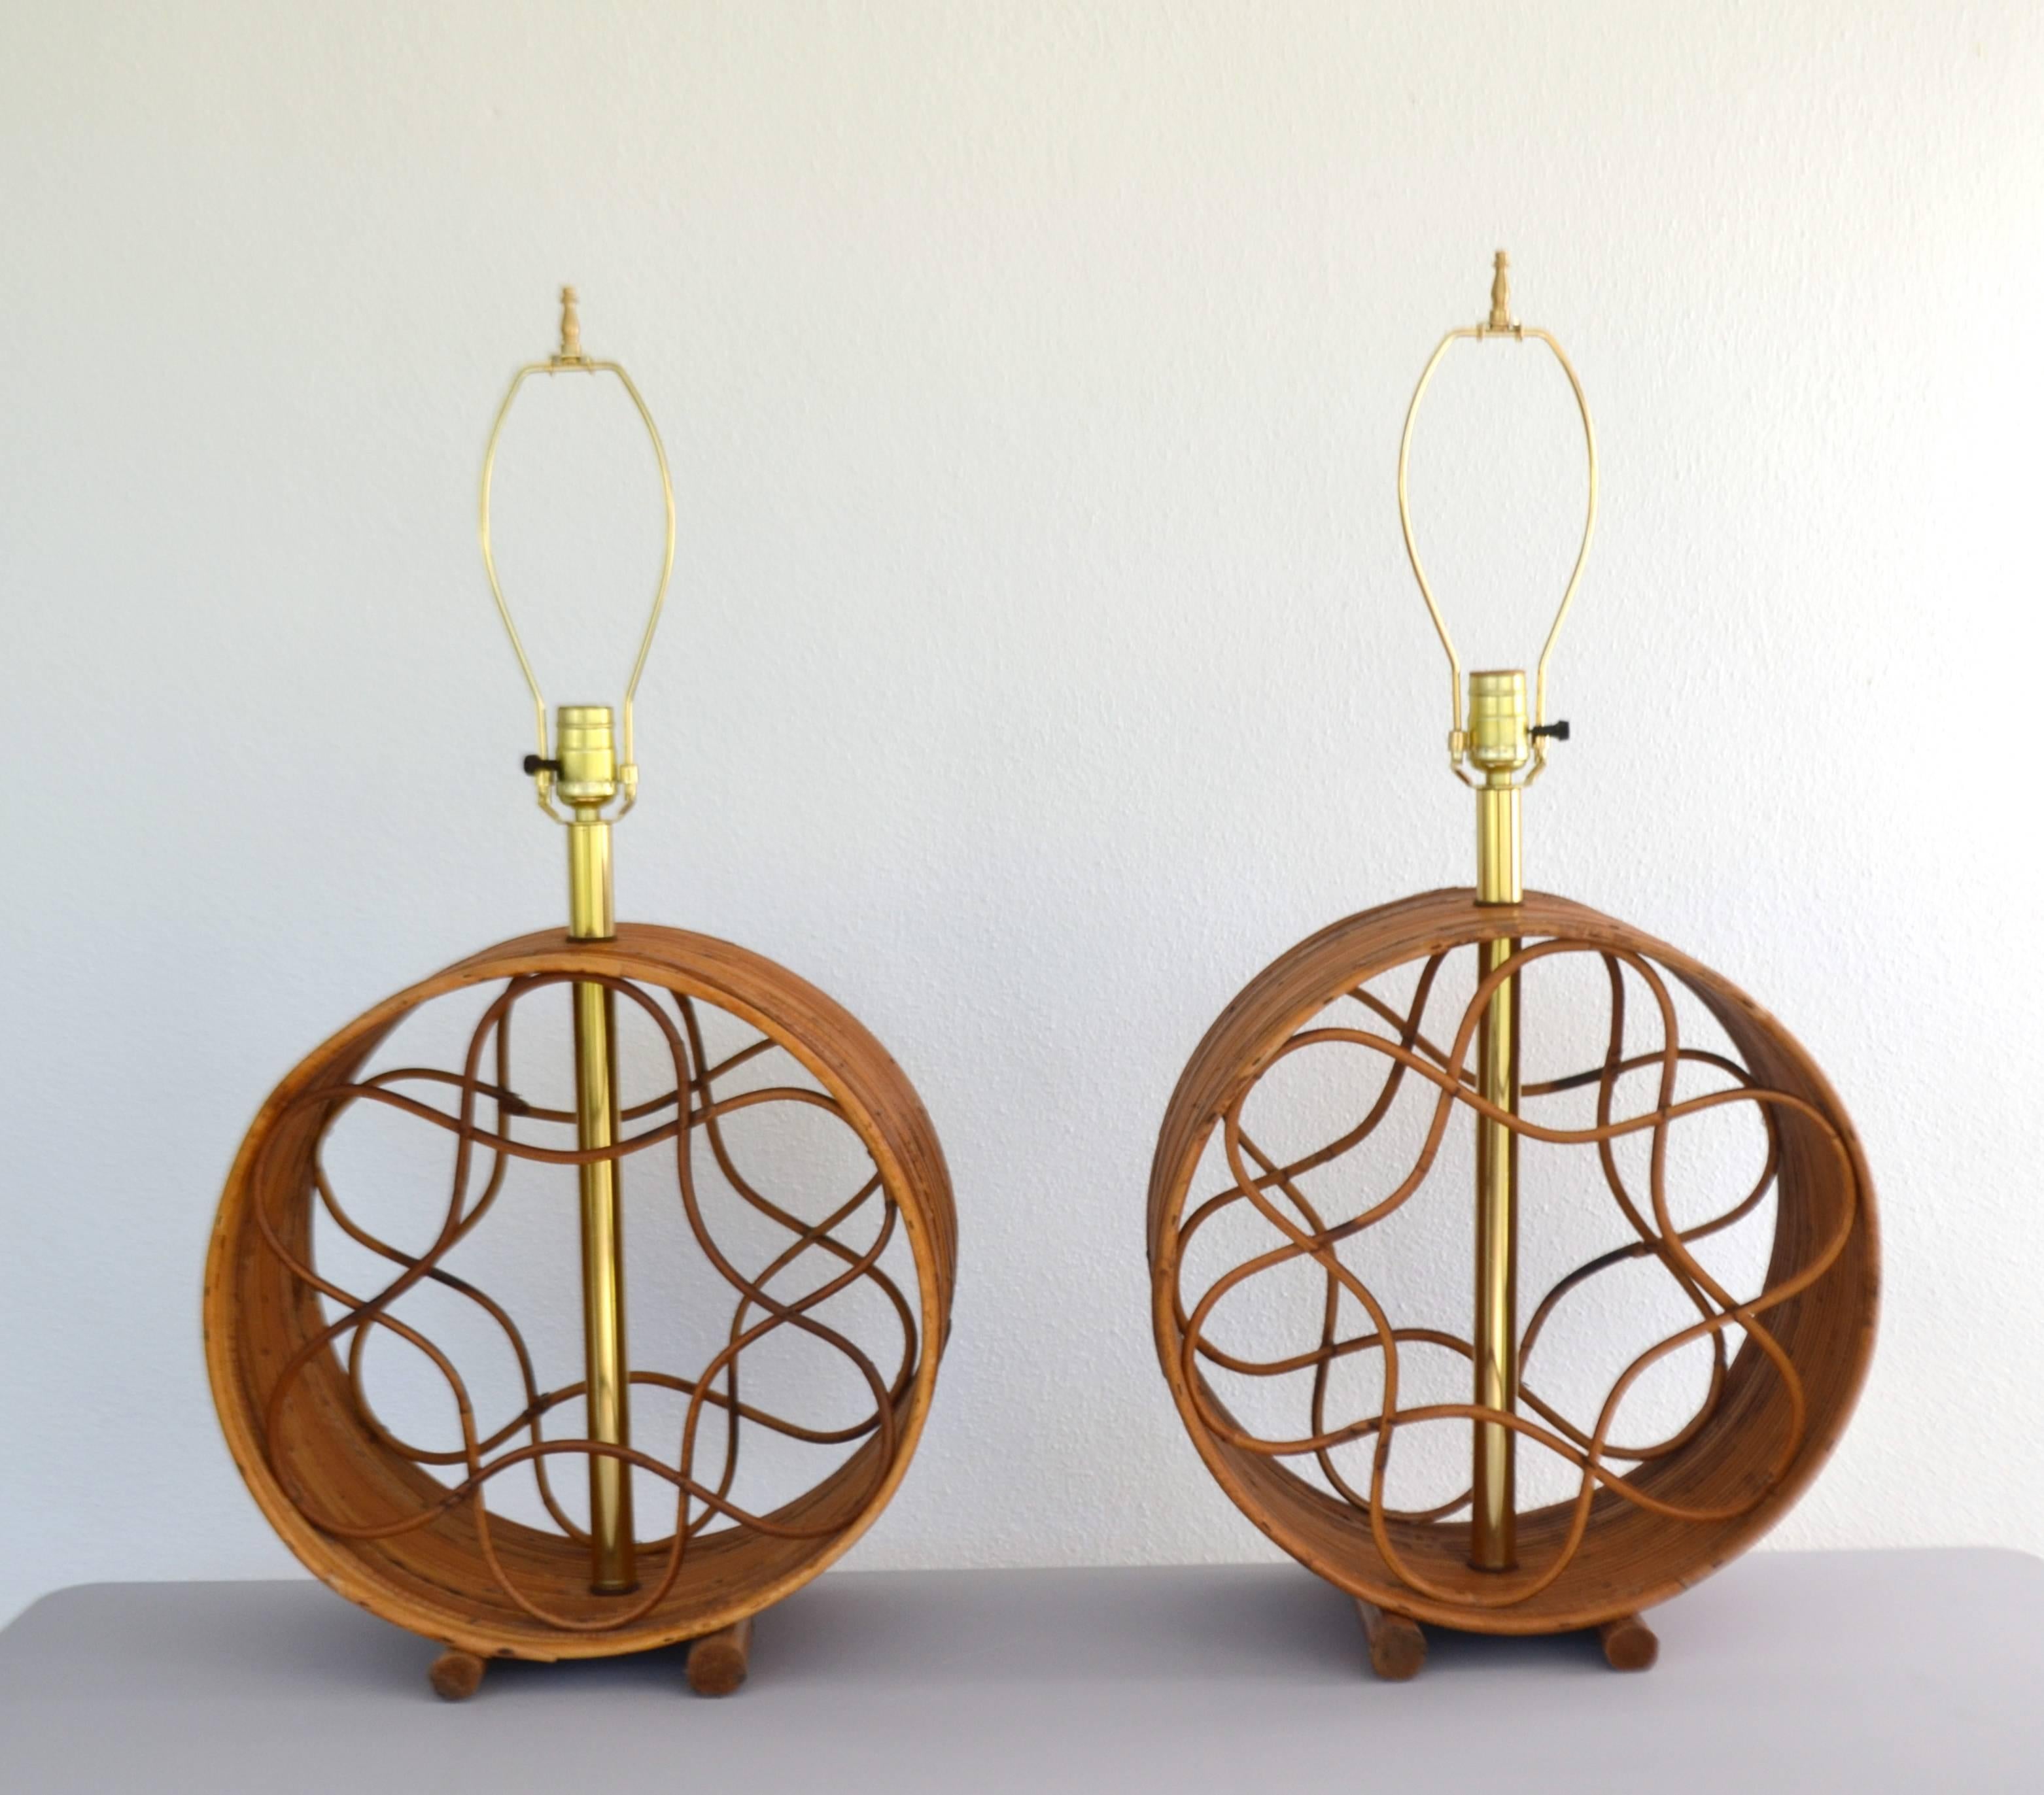 Sculptural pair of Mid-Century reed and bamboo circular form table lamps, circa 1960s. These stunning lamps are designed of graphic twisted reed elements mounted in bent bamboo forms. Lamps have been rewired with brass fittings. Shades not